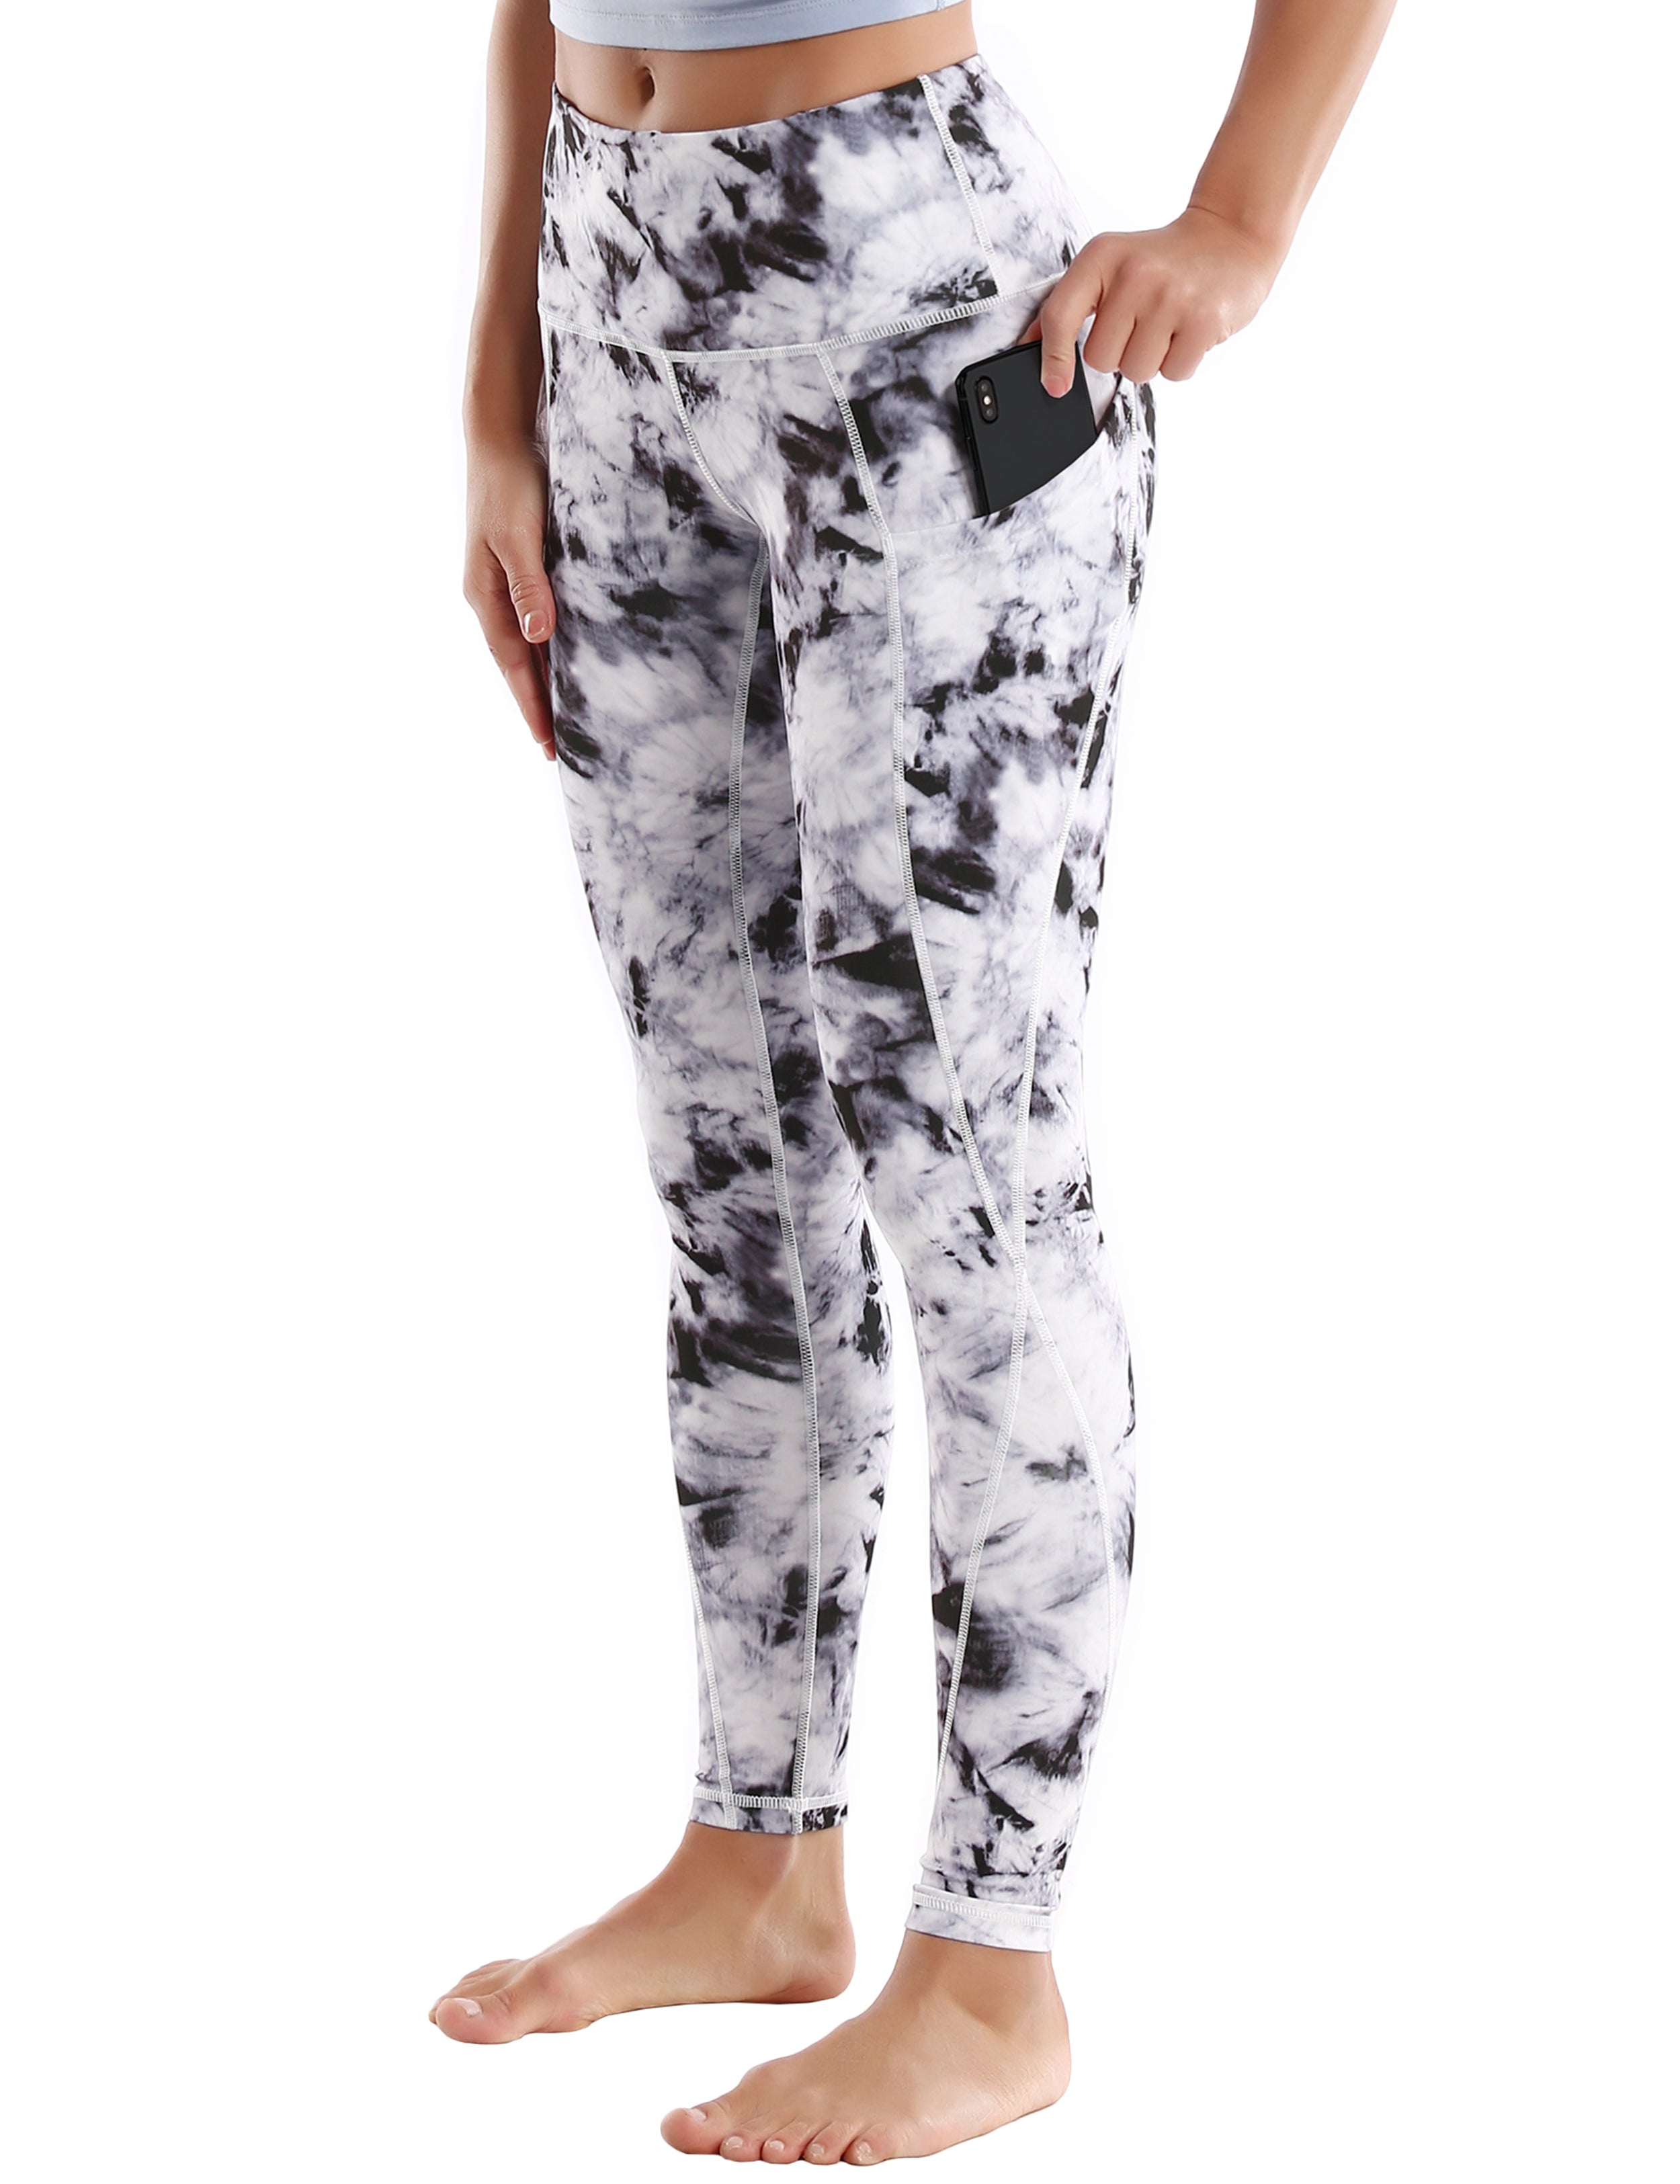 High Waist Side Pockets Jogging Pants blackdandelion 78%Polyester/22%Spandex Fabric doesn't attract lint easily 4-way stretch No see-through Moisture-wicking Tummy control Inner pocket